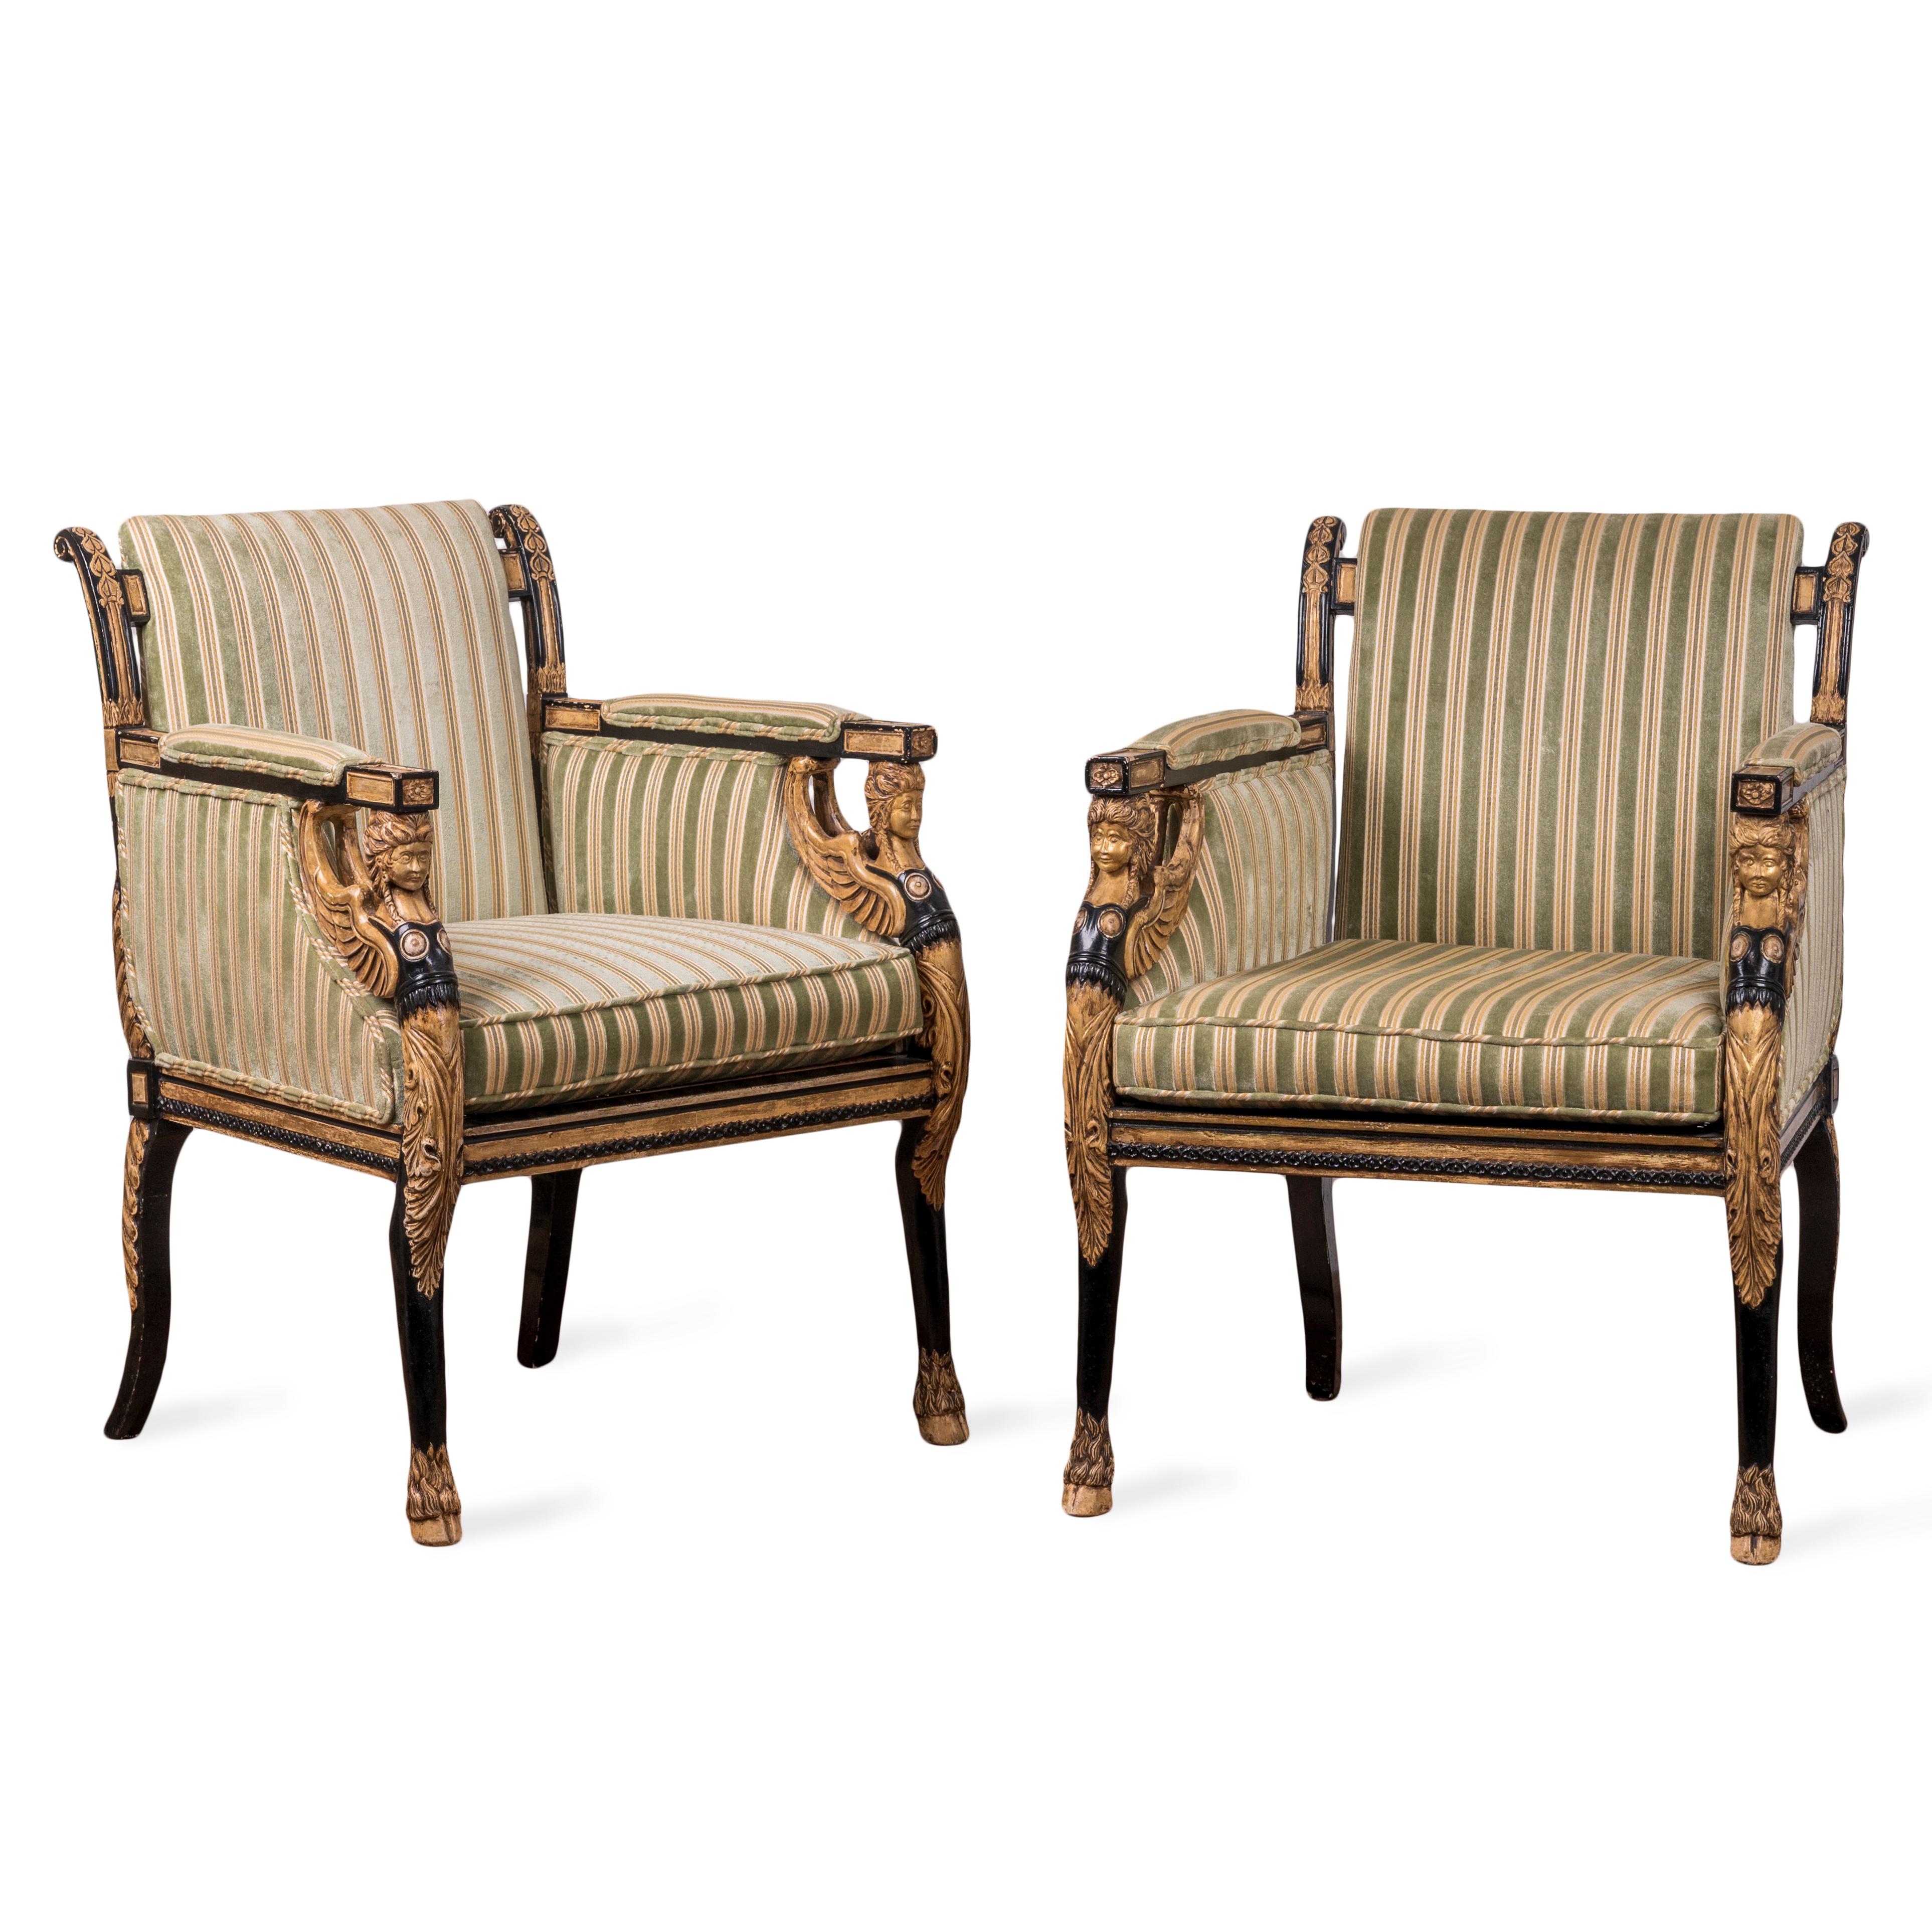 A pair of English Regency style ebonized and parcel gilt armchairs made by Burton-Ching Ltd., 20th century.

26 inches wide by 26 inches deep by 35 inches tall

seat height 19 inches; arm height 27 ½ inches 
